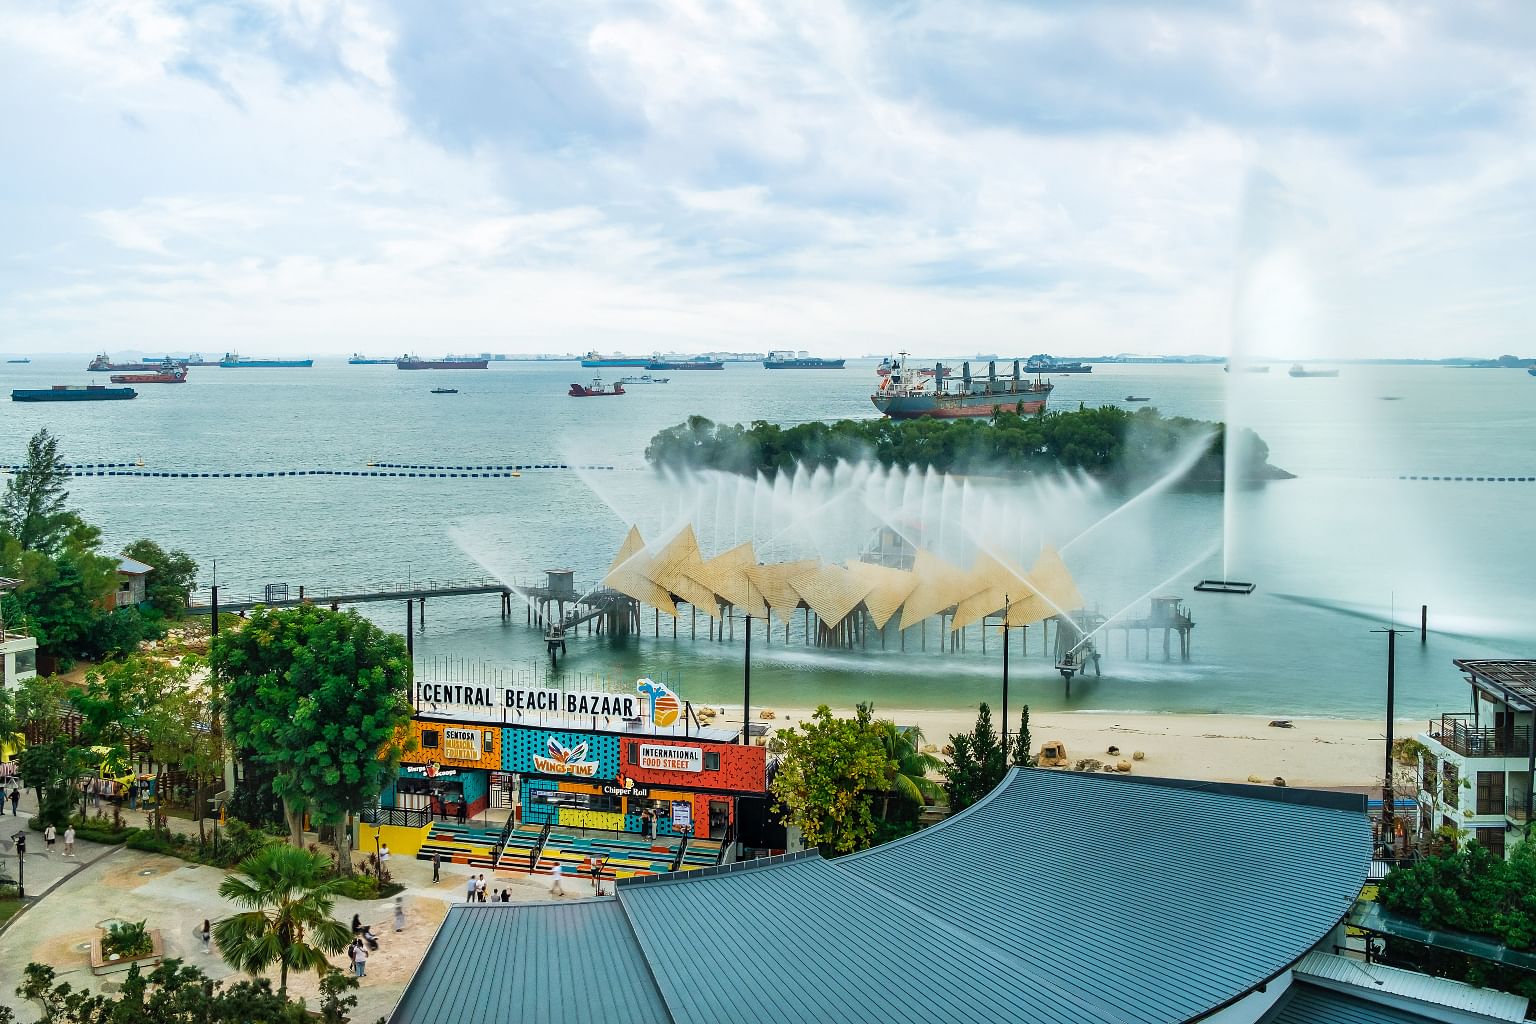 New attraction Central Beach Bazaar opens at Sentosa, as visitor numbers rise